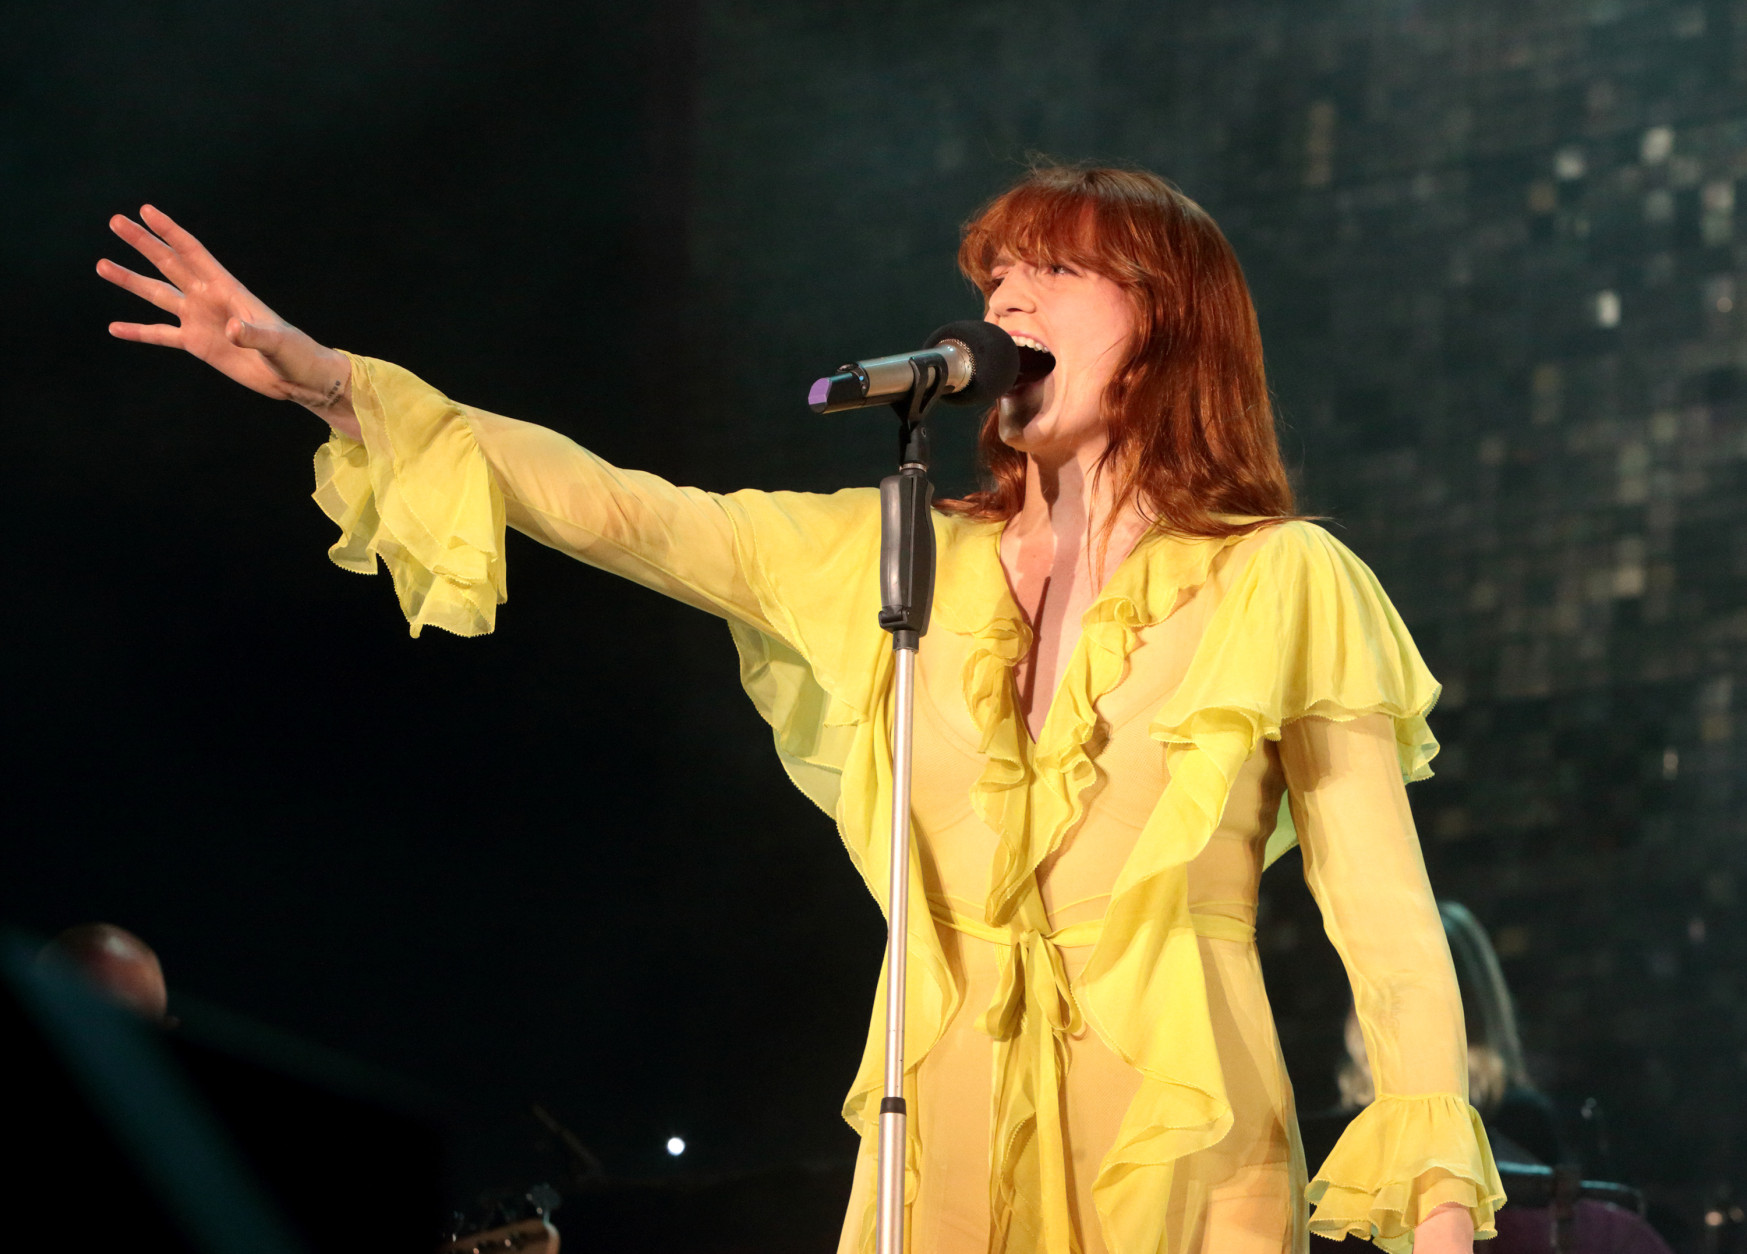 Florence Welch of Florence + The Machine performs on Day 3 of the 2016 Firefly Music Festival at The Woodlands on Saturday, June 18, 2016, in Dover, Del. (Photo by Owen Sweeney/Invision/AP)